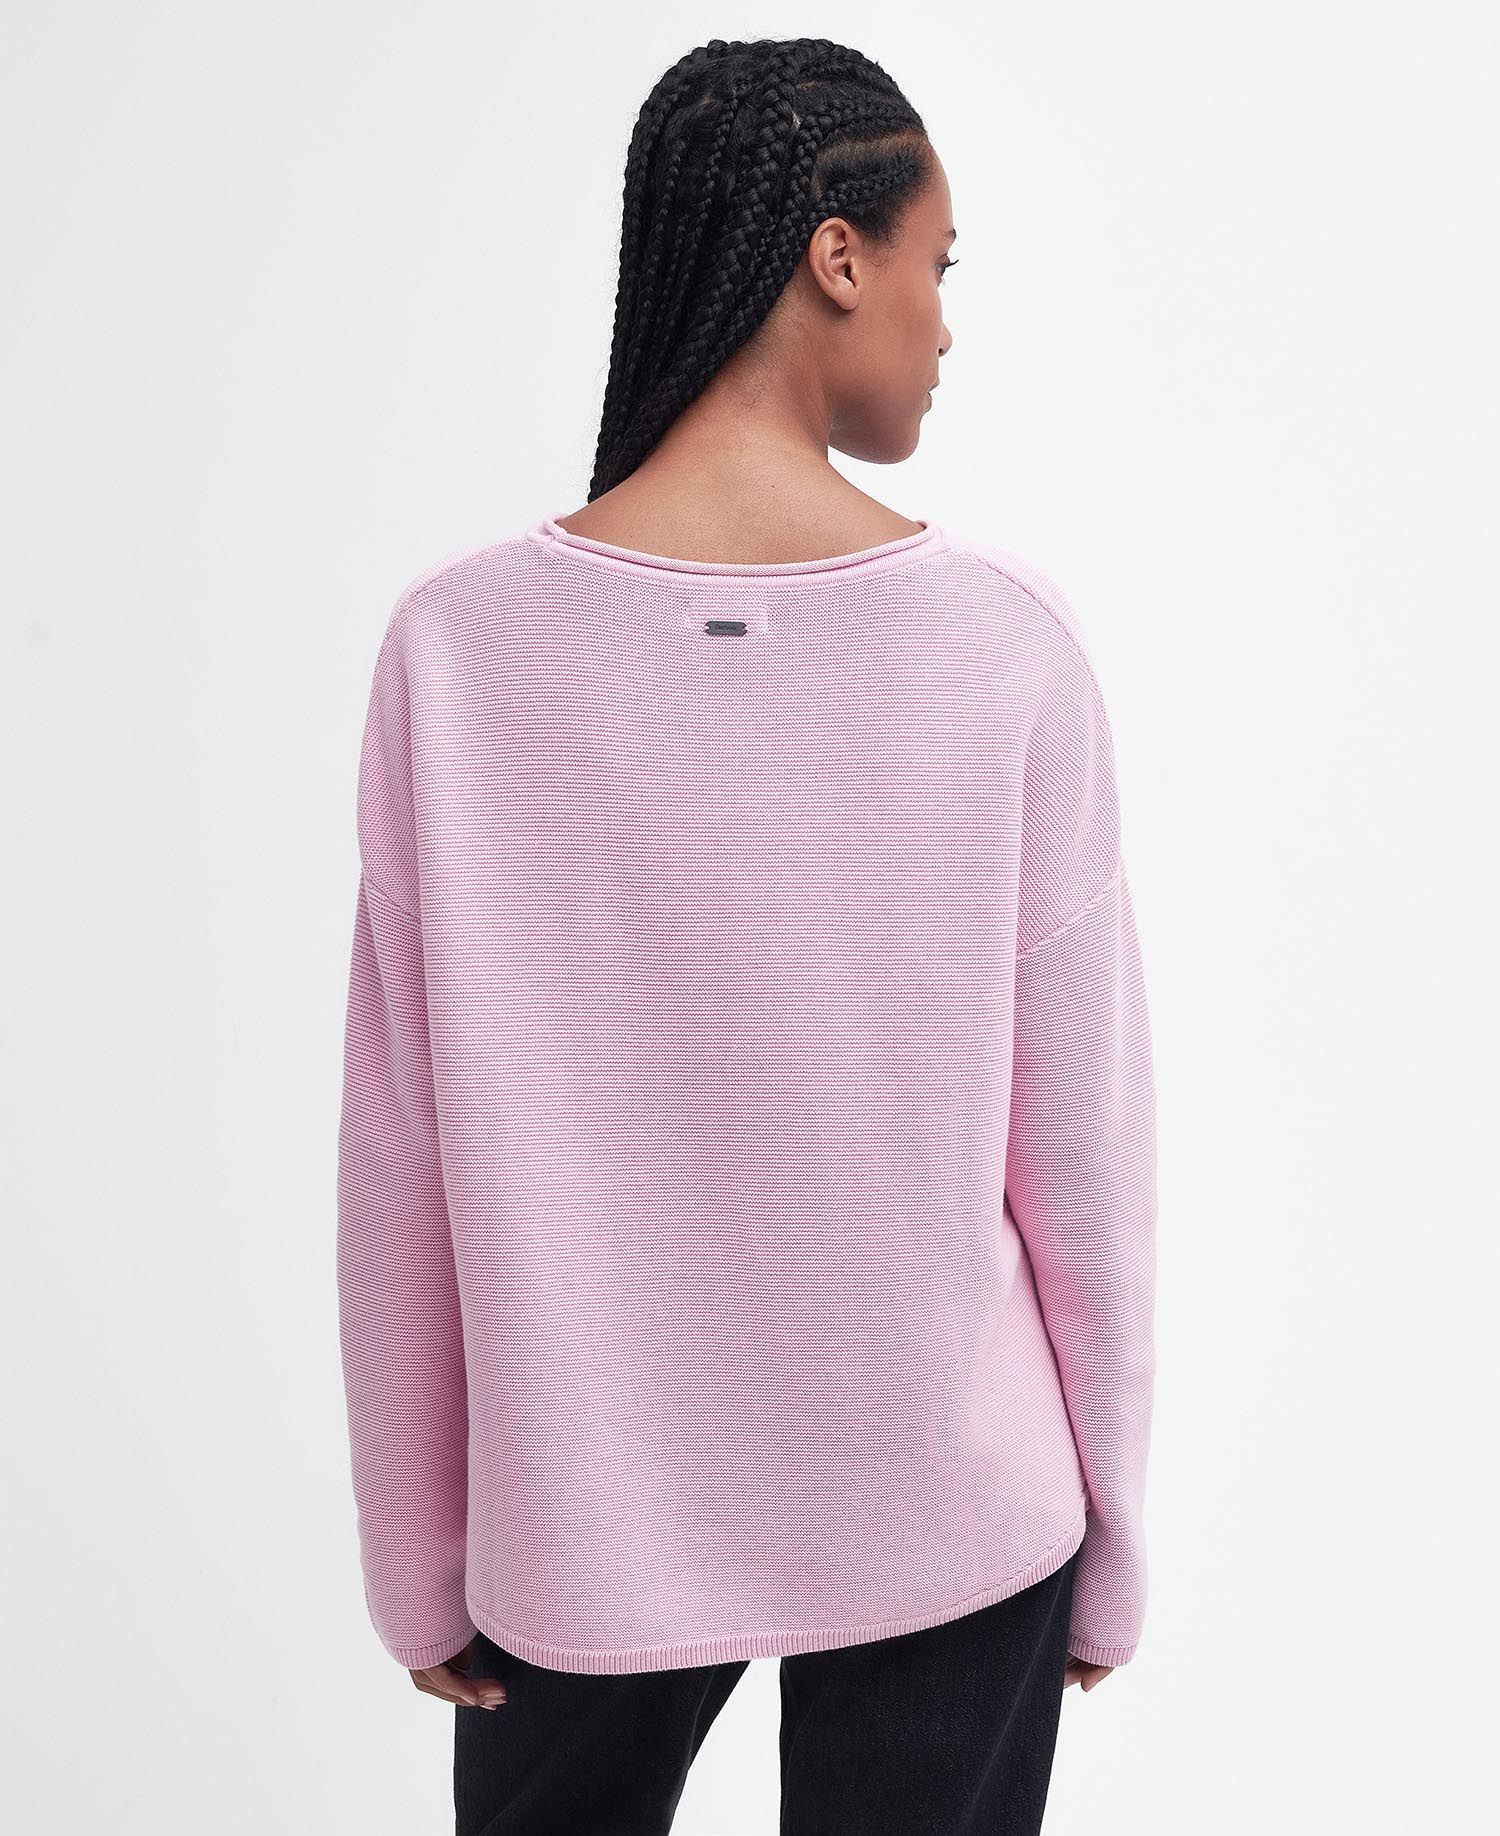 Barbour Marine Knitted Jumper - Mallow Pink